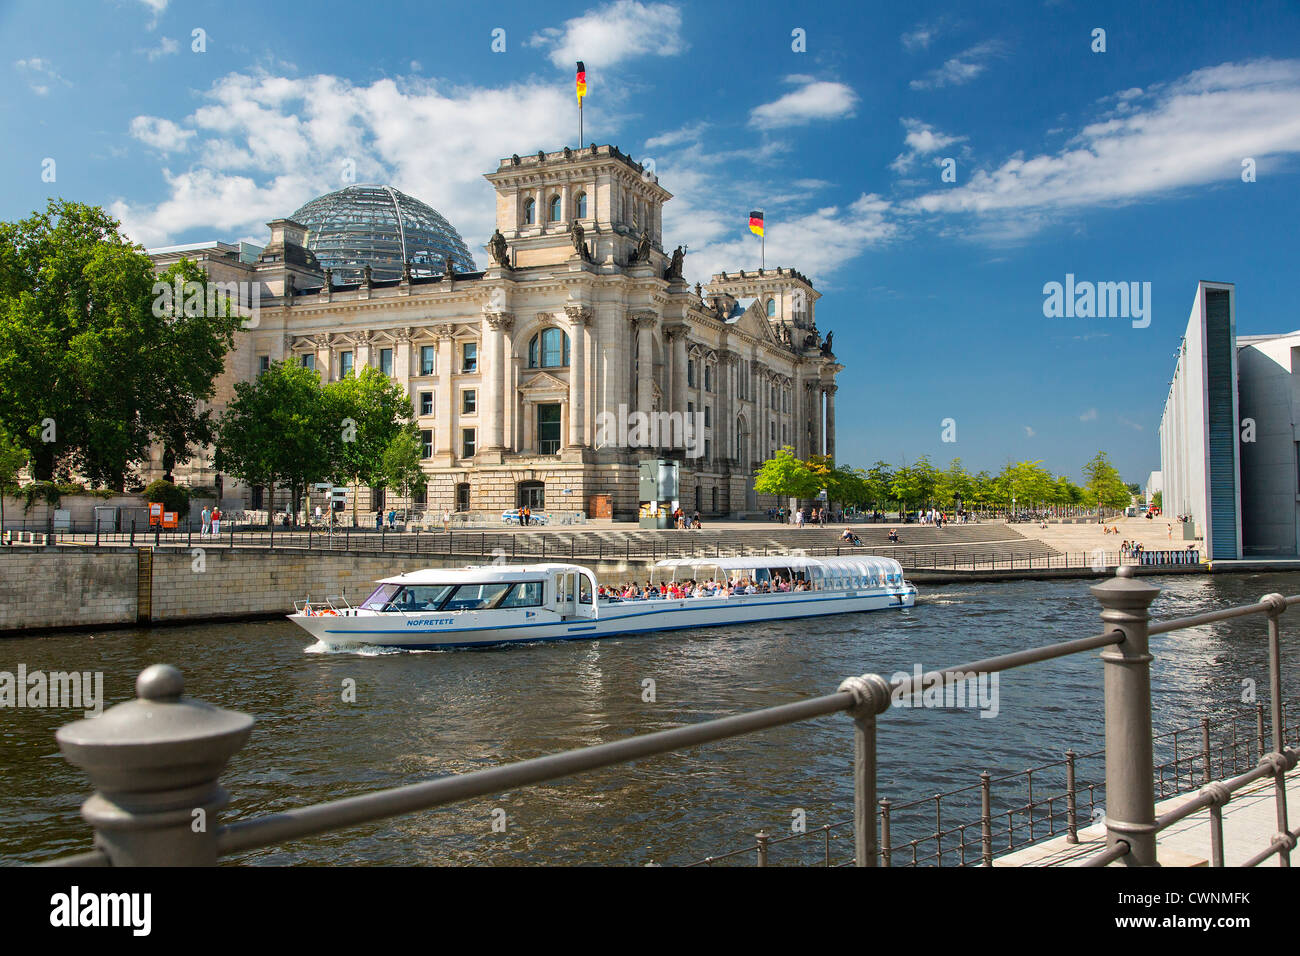 Europe, Germany, Berlin, A tour boat on the Spree River Stock Photo